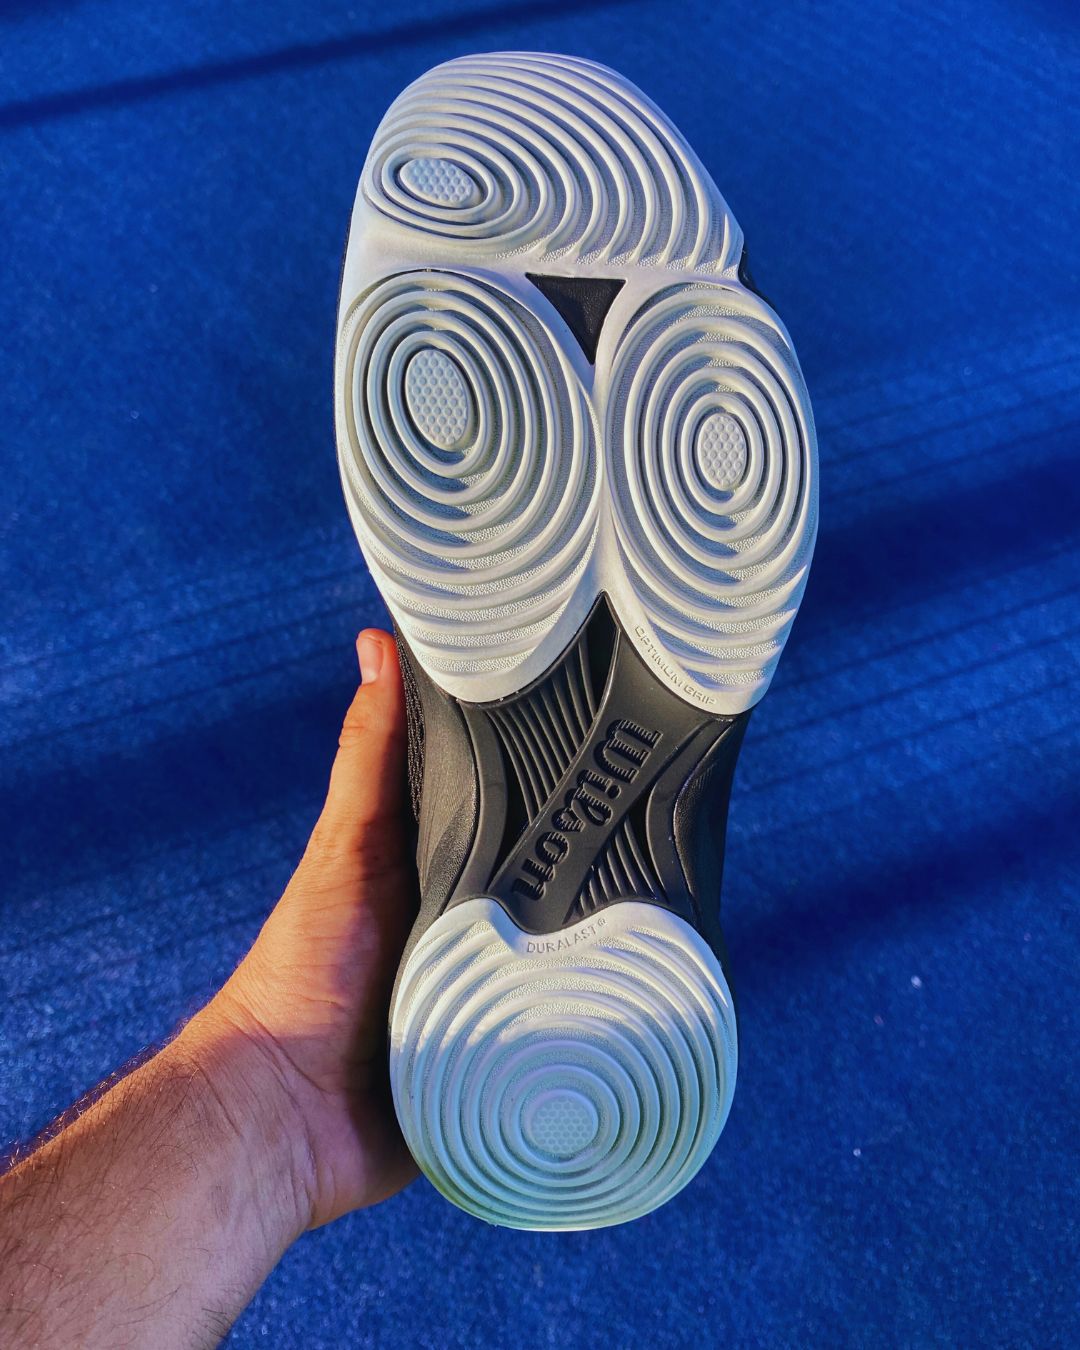 The outsole features a proprietary design called Optimum Grip that favors turns and changes of direction thanks to the spiral design